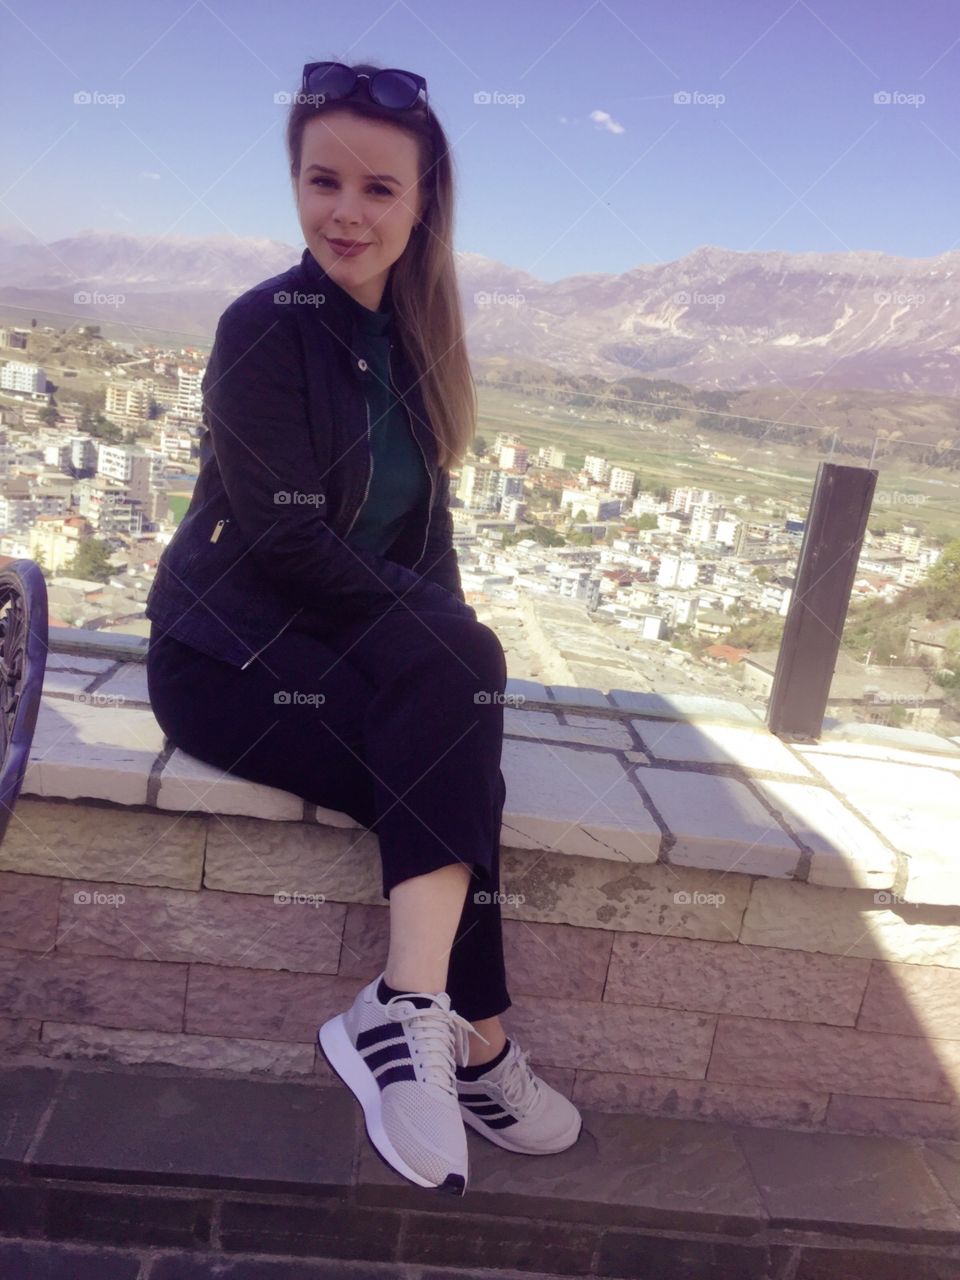 #nature_love #on_top_of_the_town #smile #life_is_good #adidas_albania 